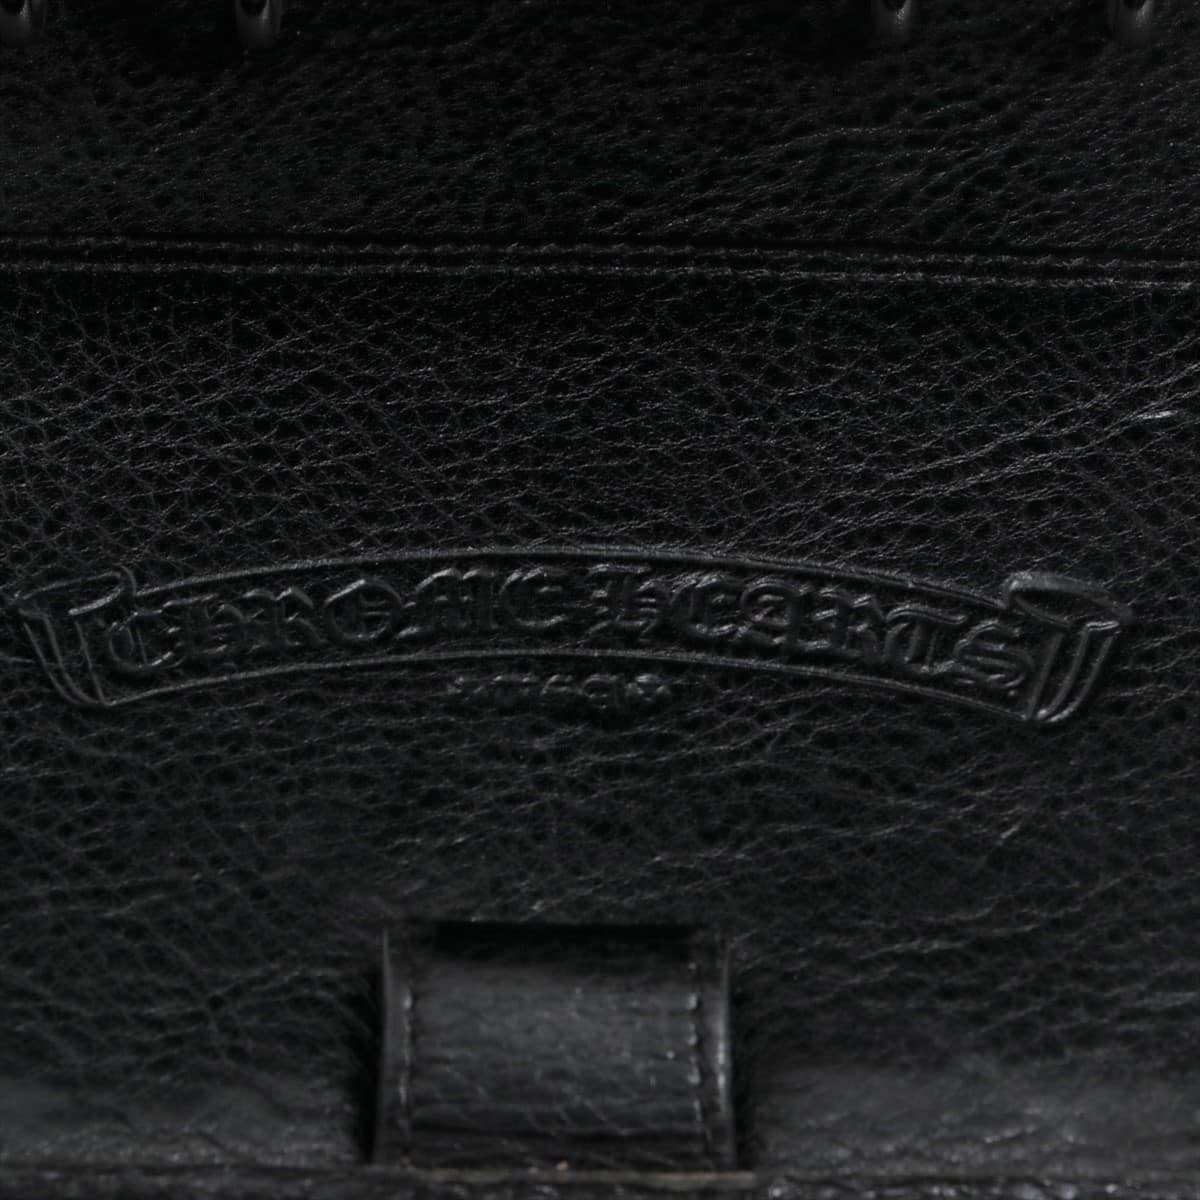 Chrome Hearts Agenda Notebook cover Leather